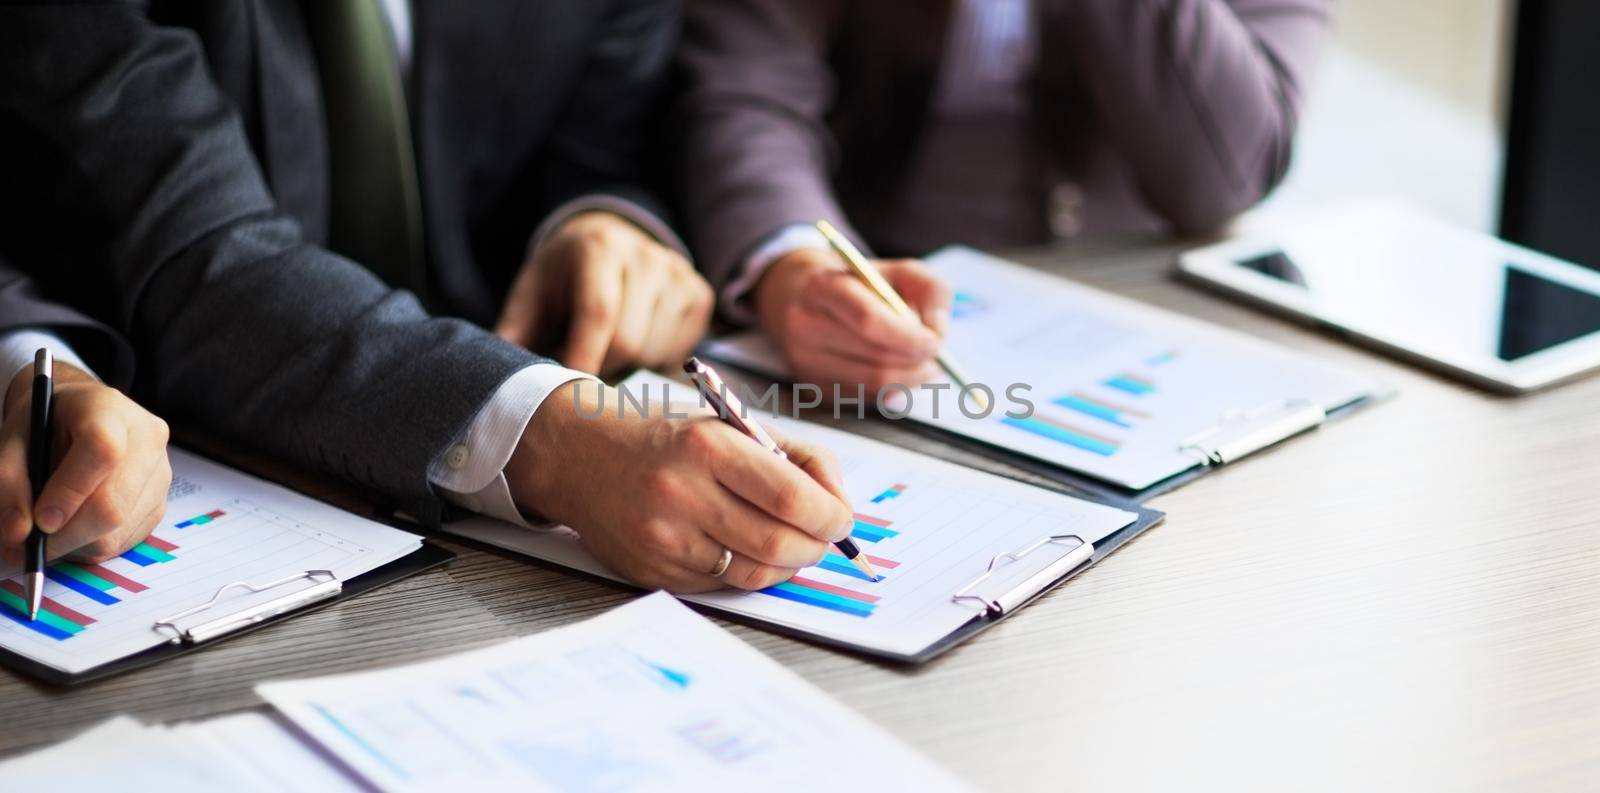 Banking business or financial analyst desktop accounting charts, pens indicates graphics